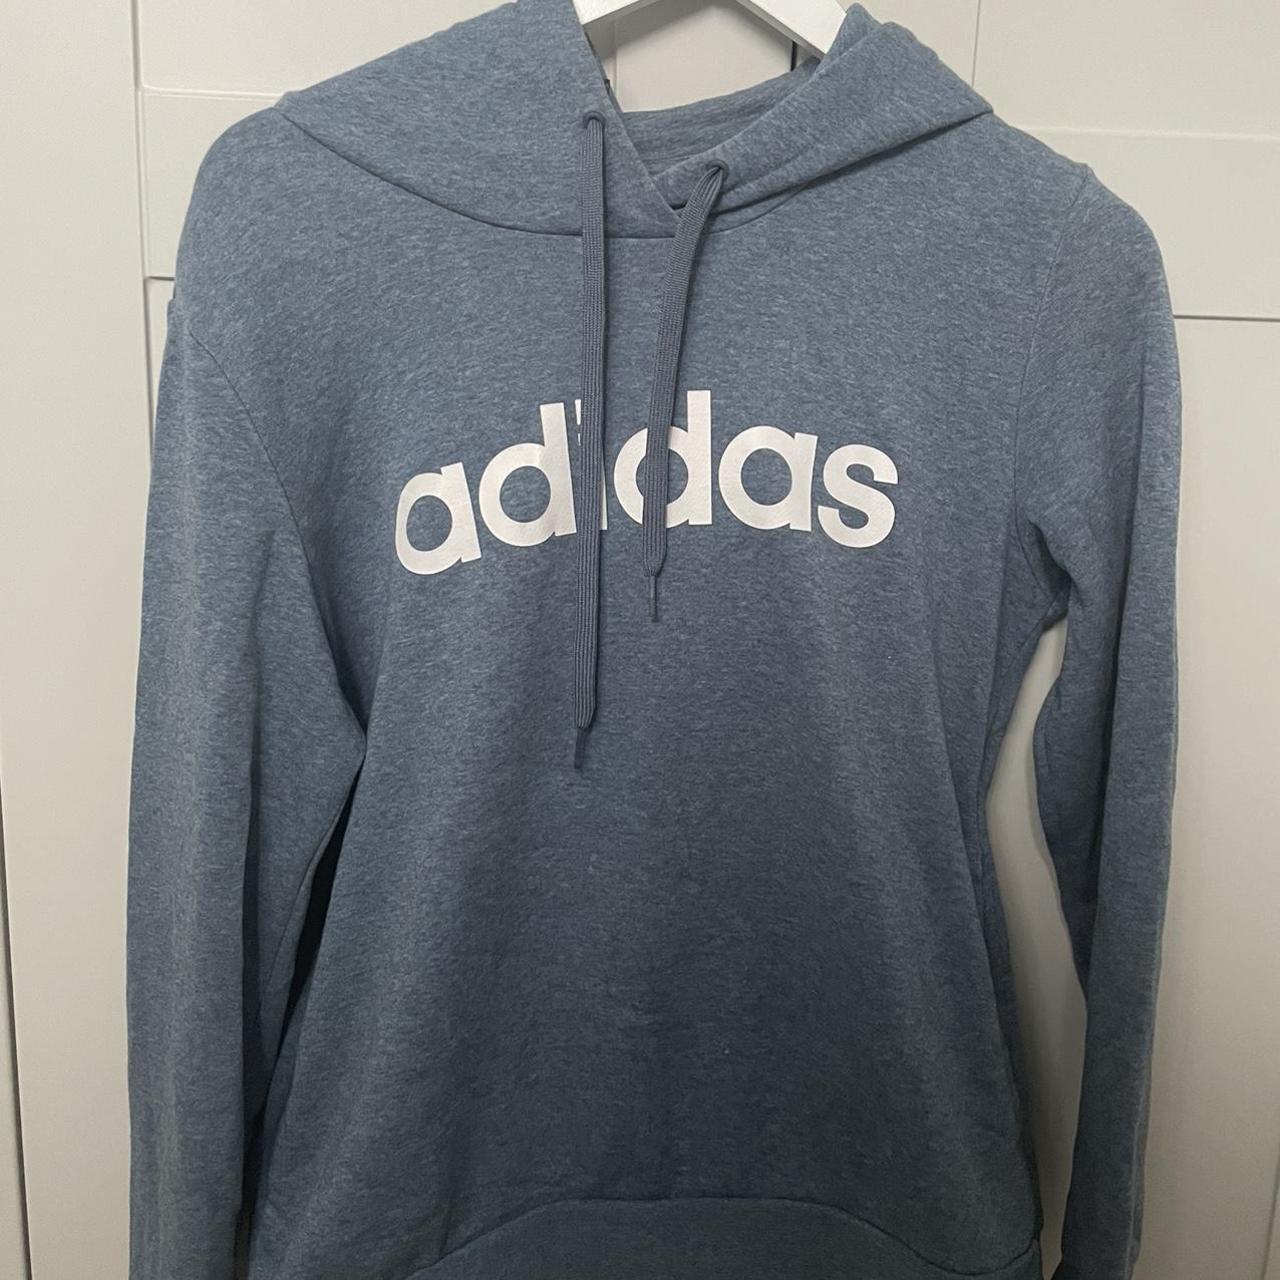 Blue adidas hoodie! 💙 Size M (would fit sizes 6-10)... - Depop